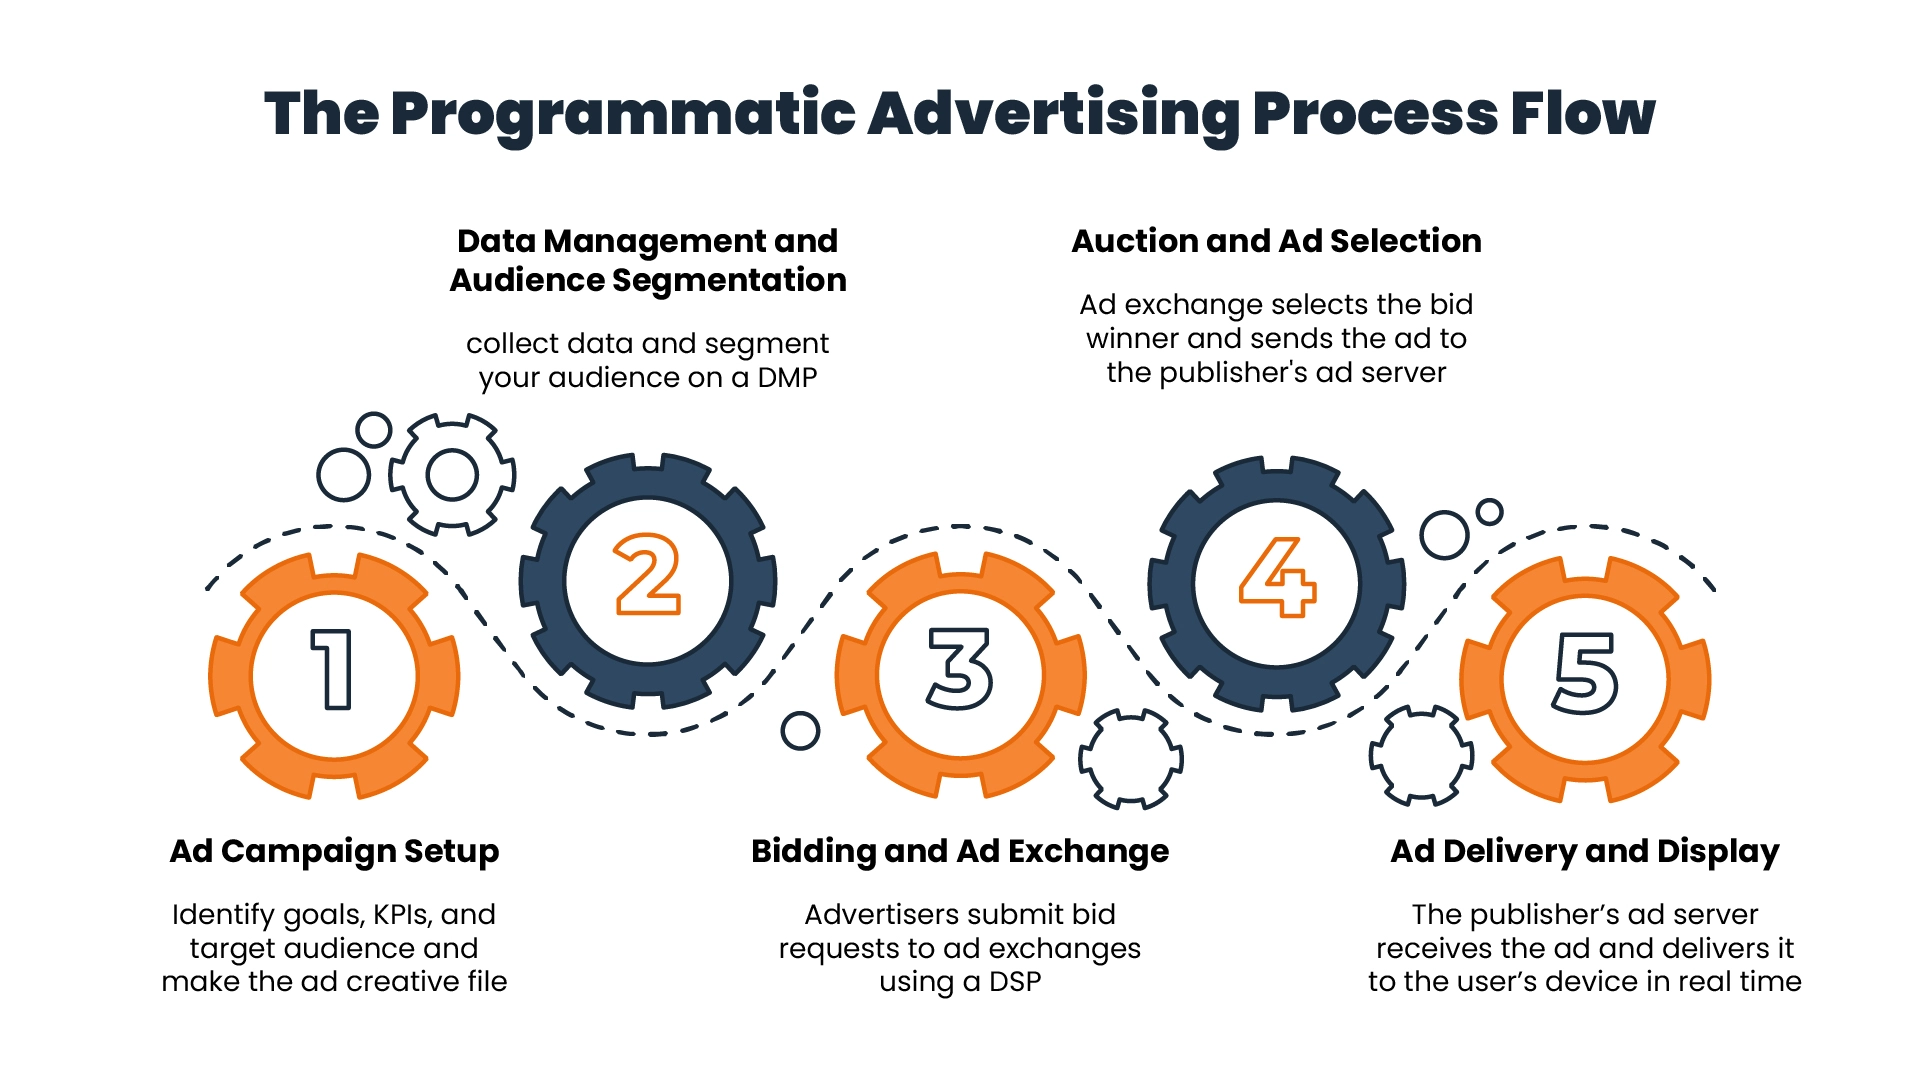 The Process Flow for Programmatic Advertising